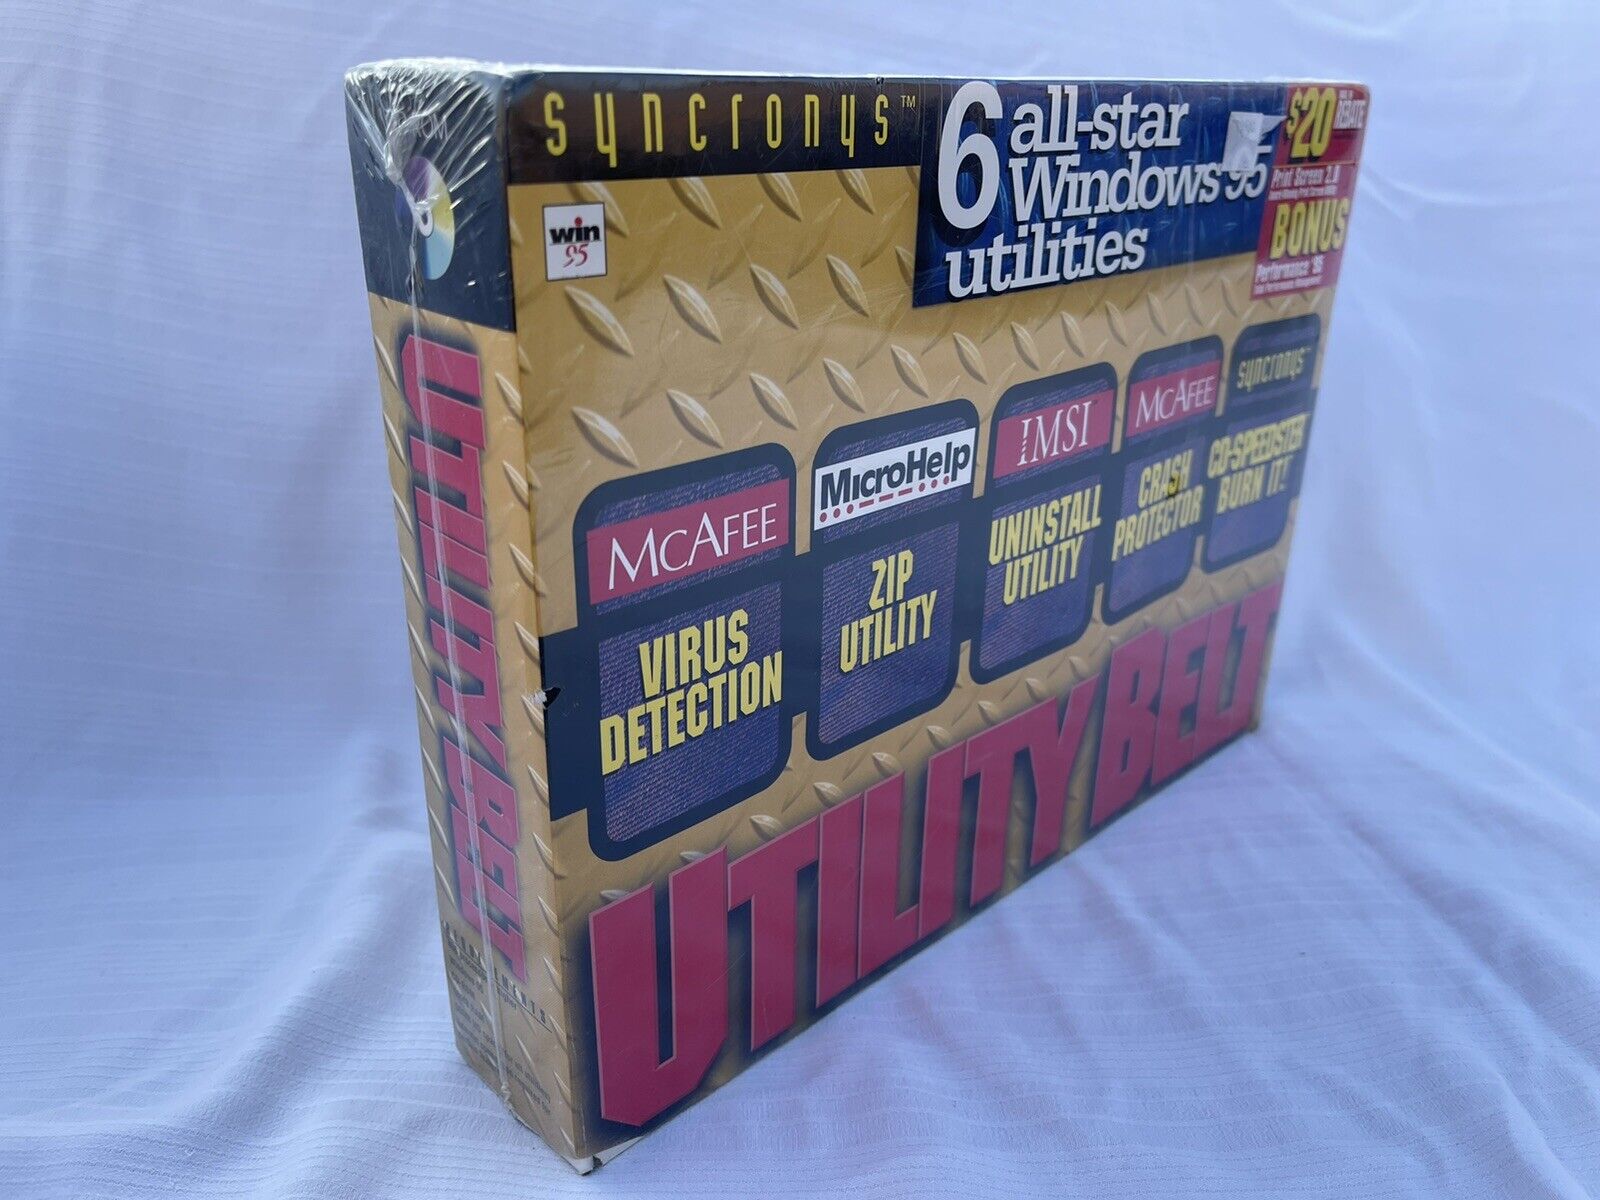 Syncronys 6 Utility Belt All-Star Windows 95 Utilities - Factory Sealed - New